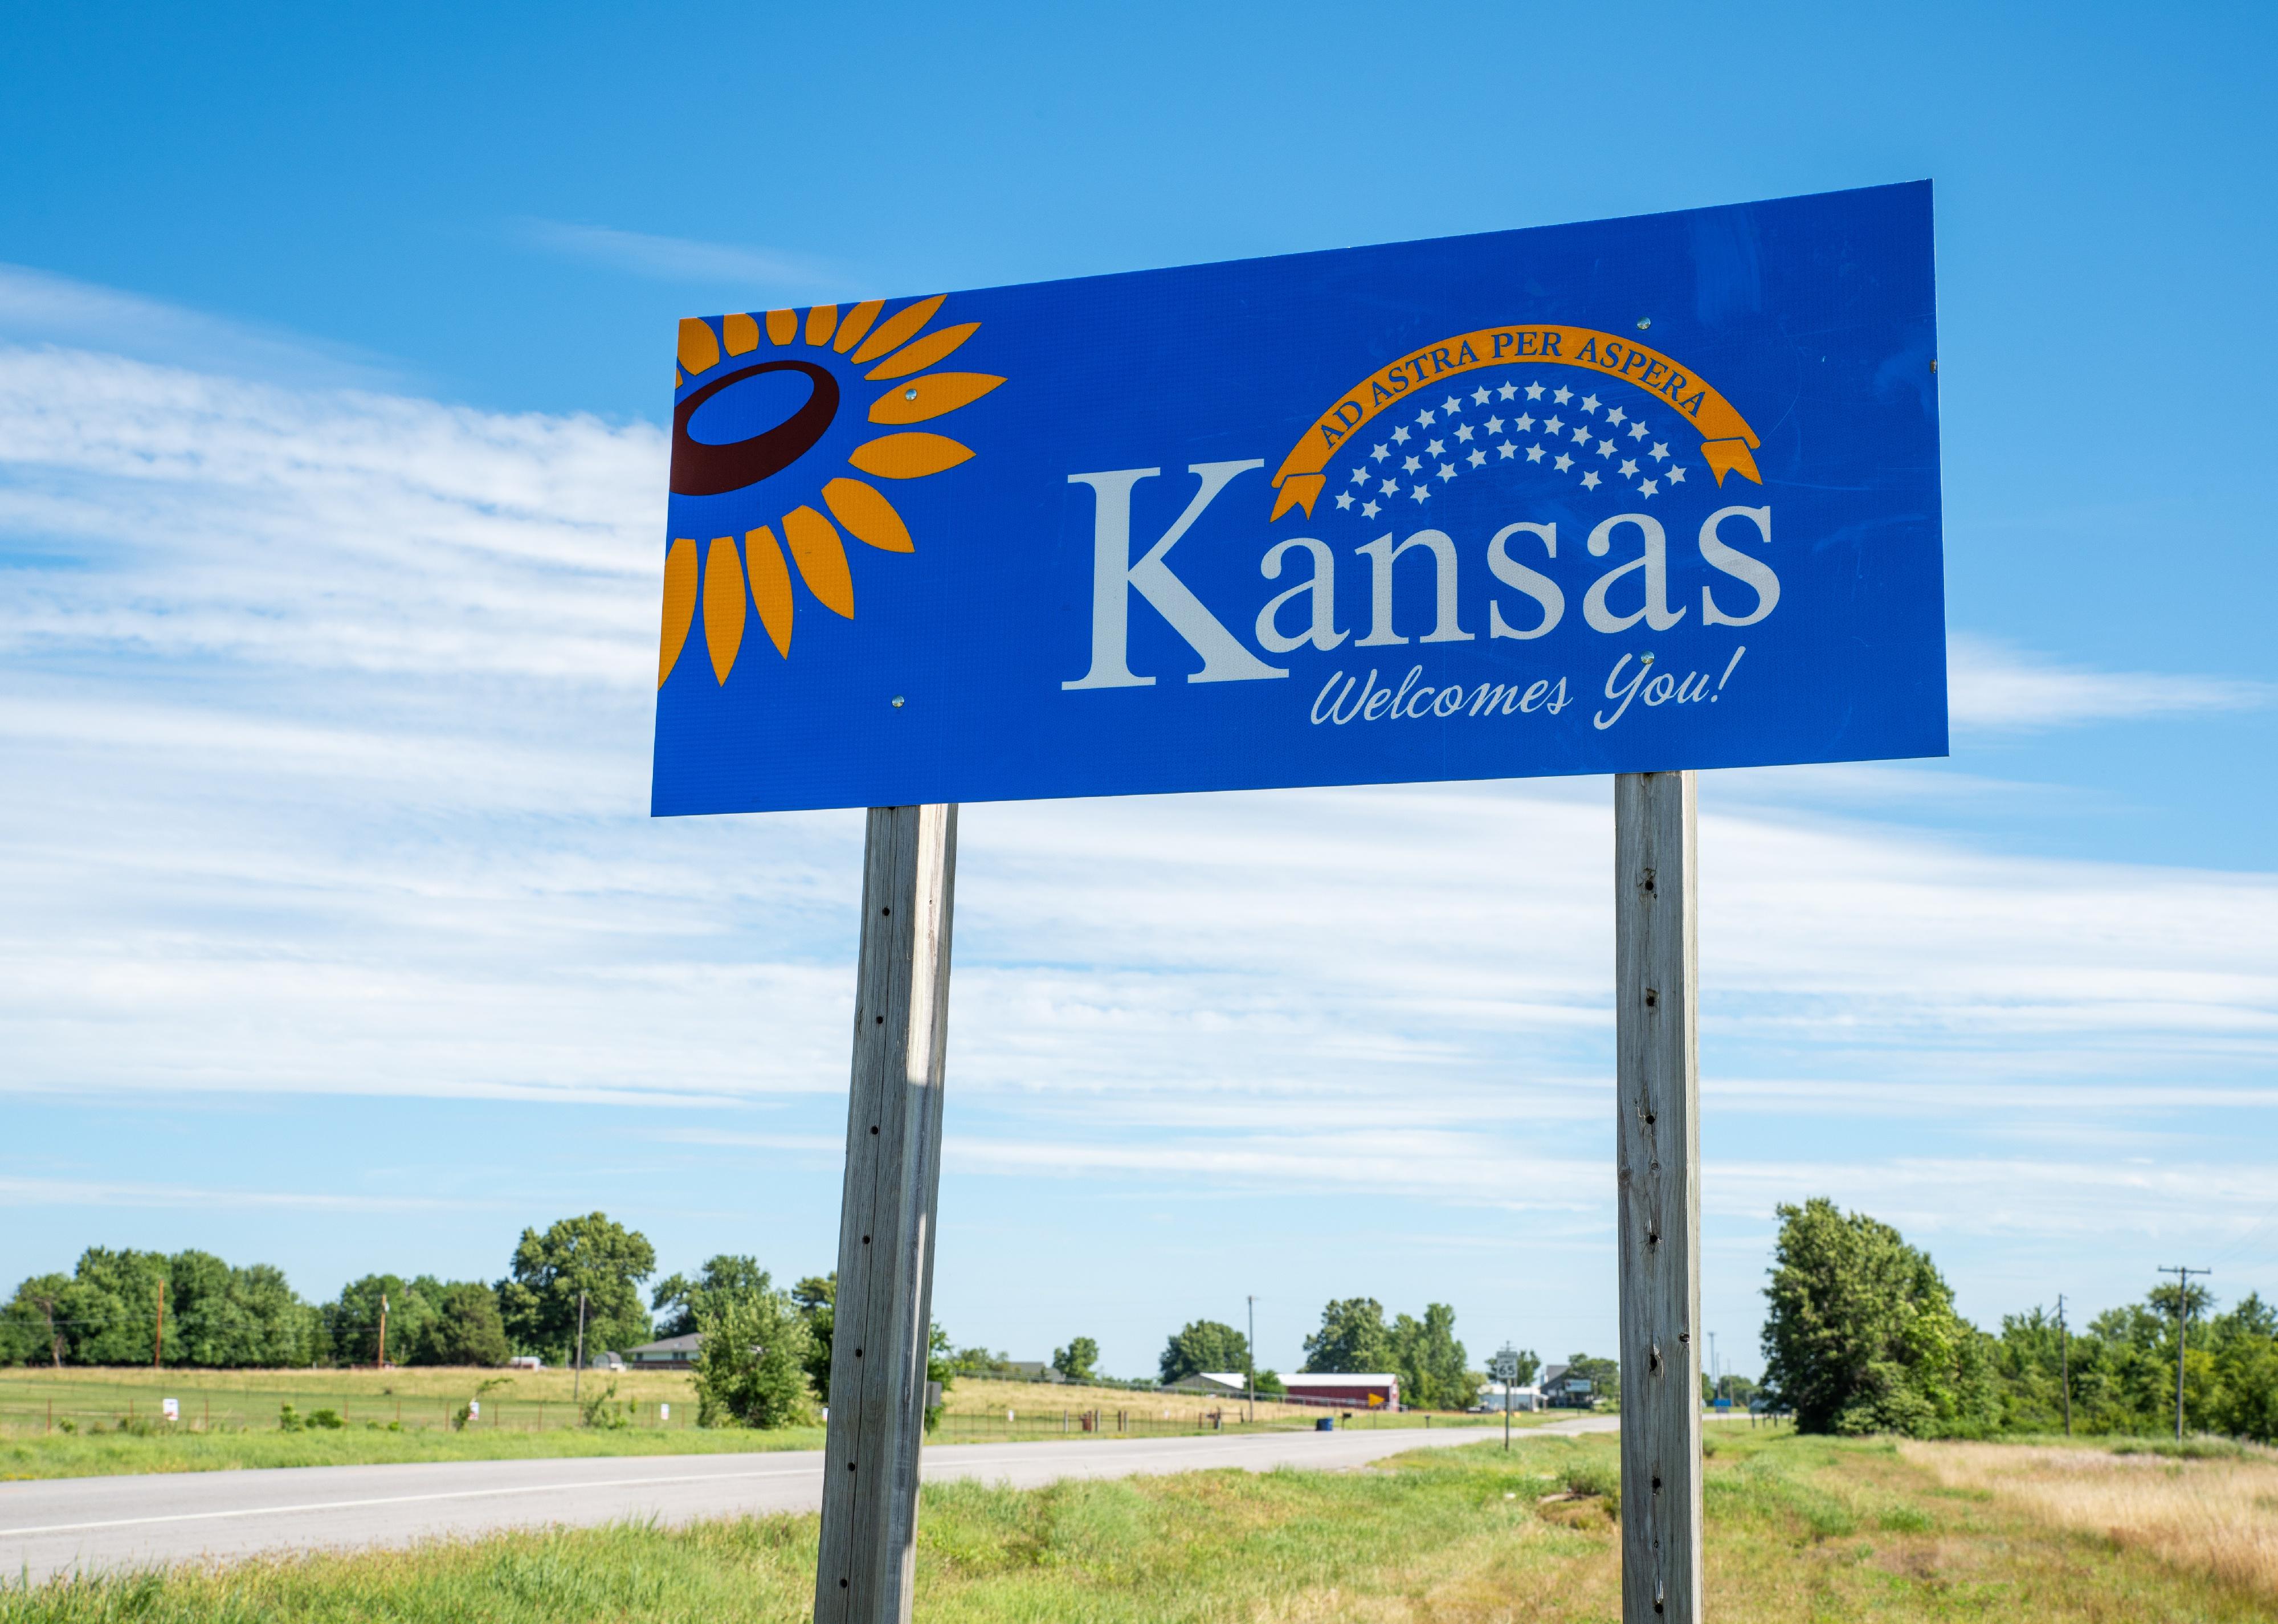 Welcome to Kansas highway sign.